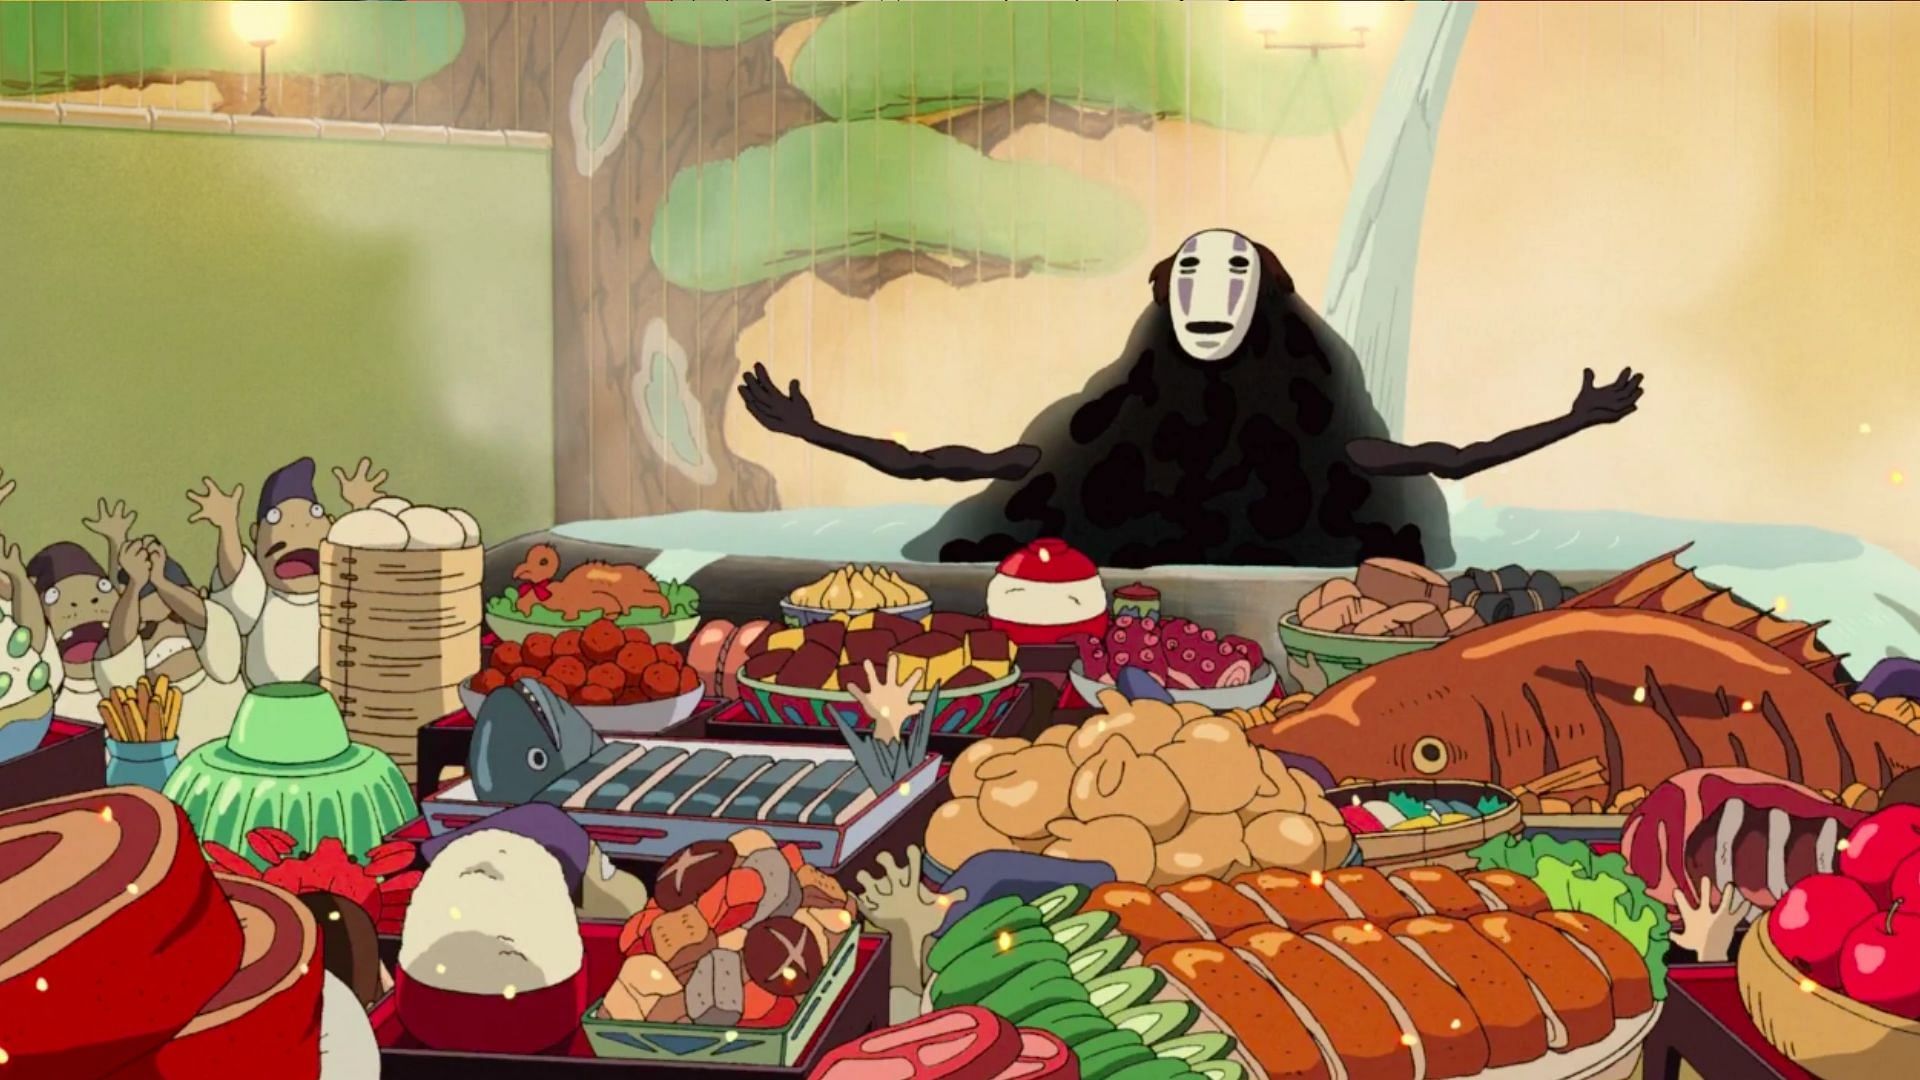 No-Face is one of the most memorable characters in this film (Image via Studio Ghibli)